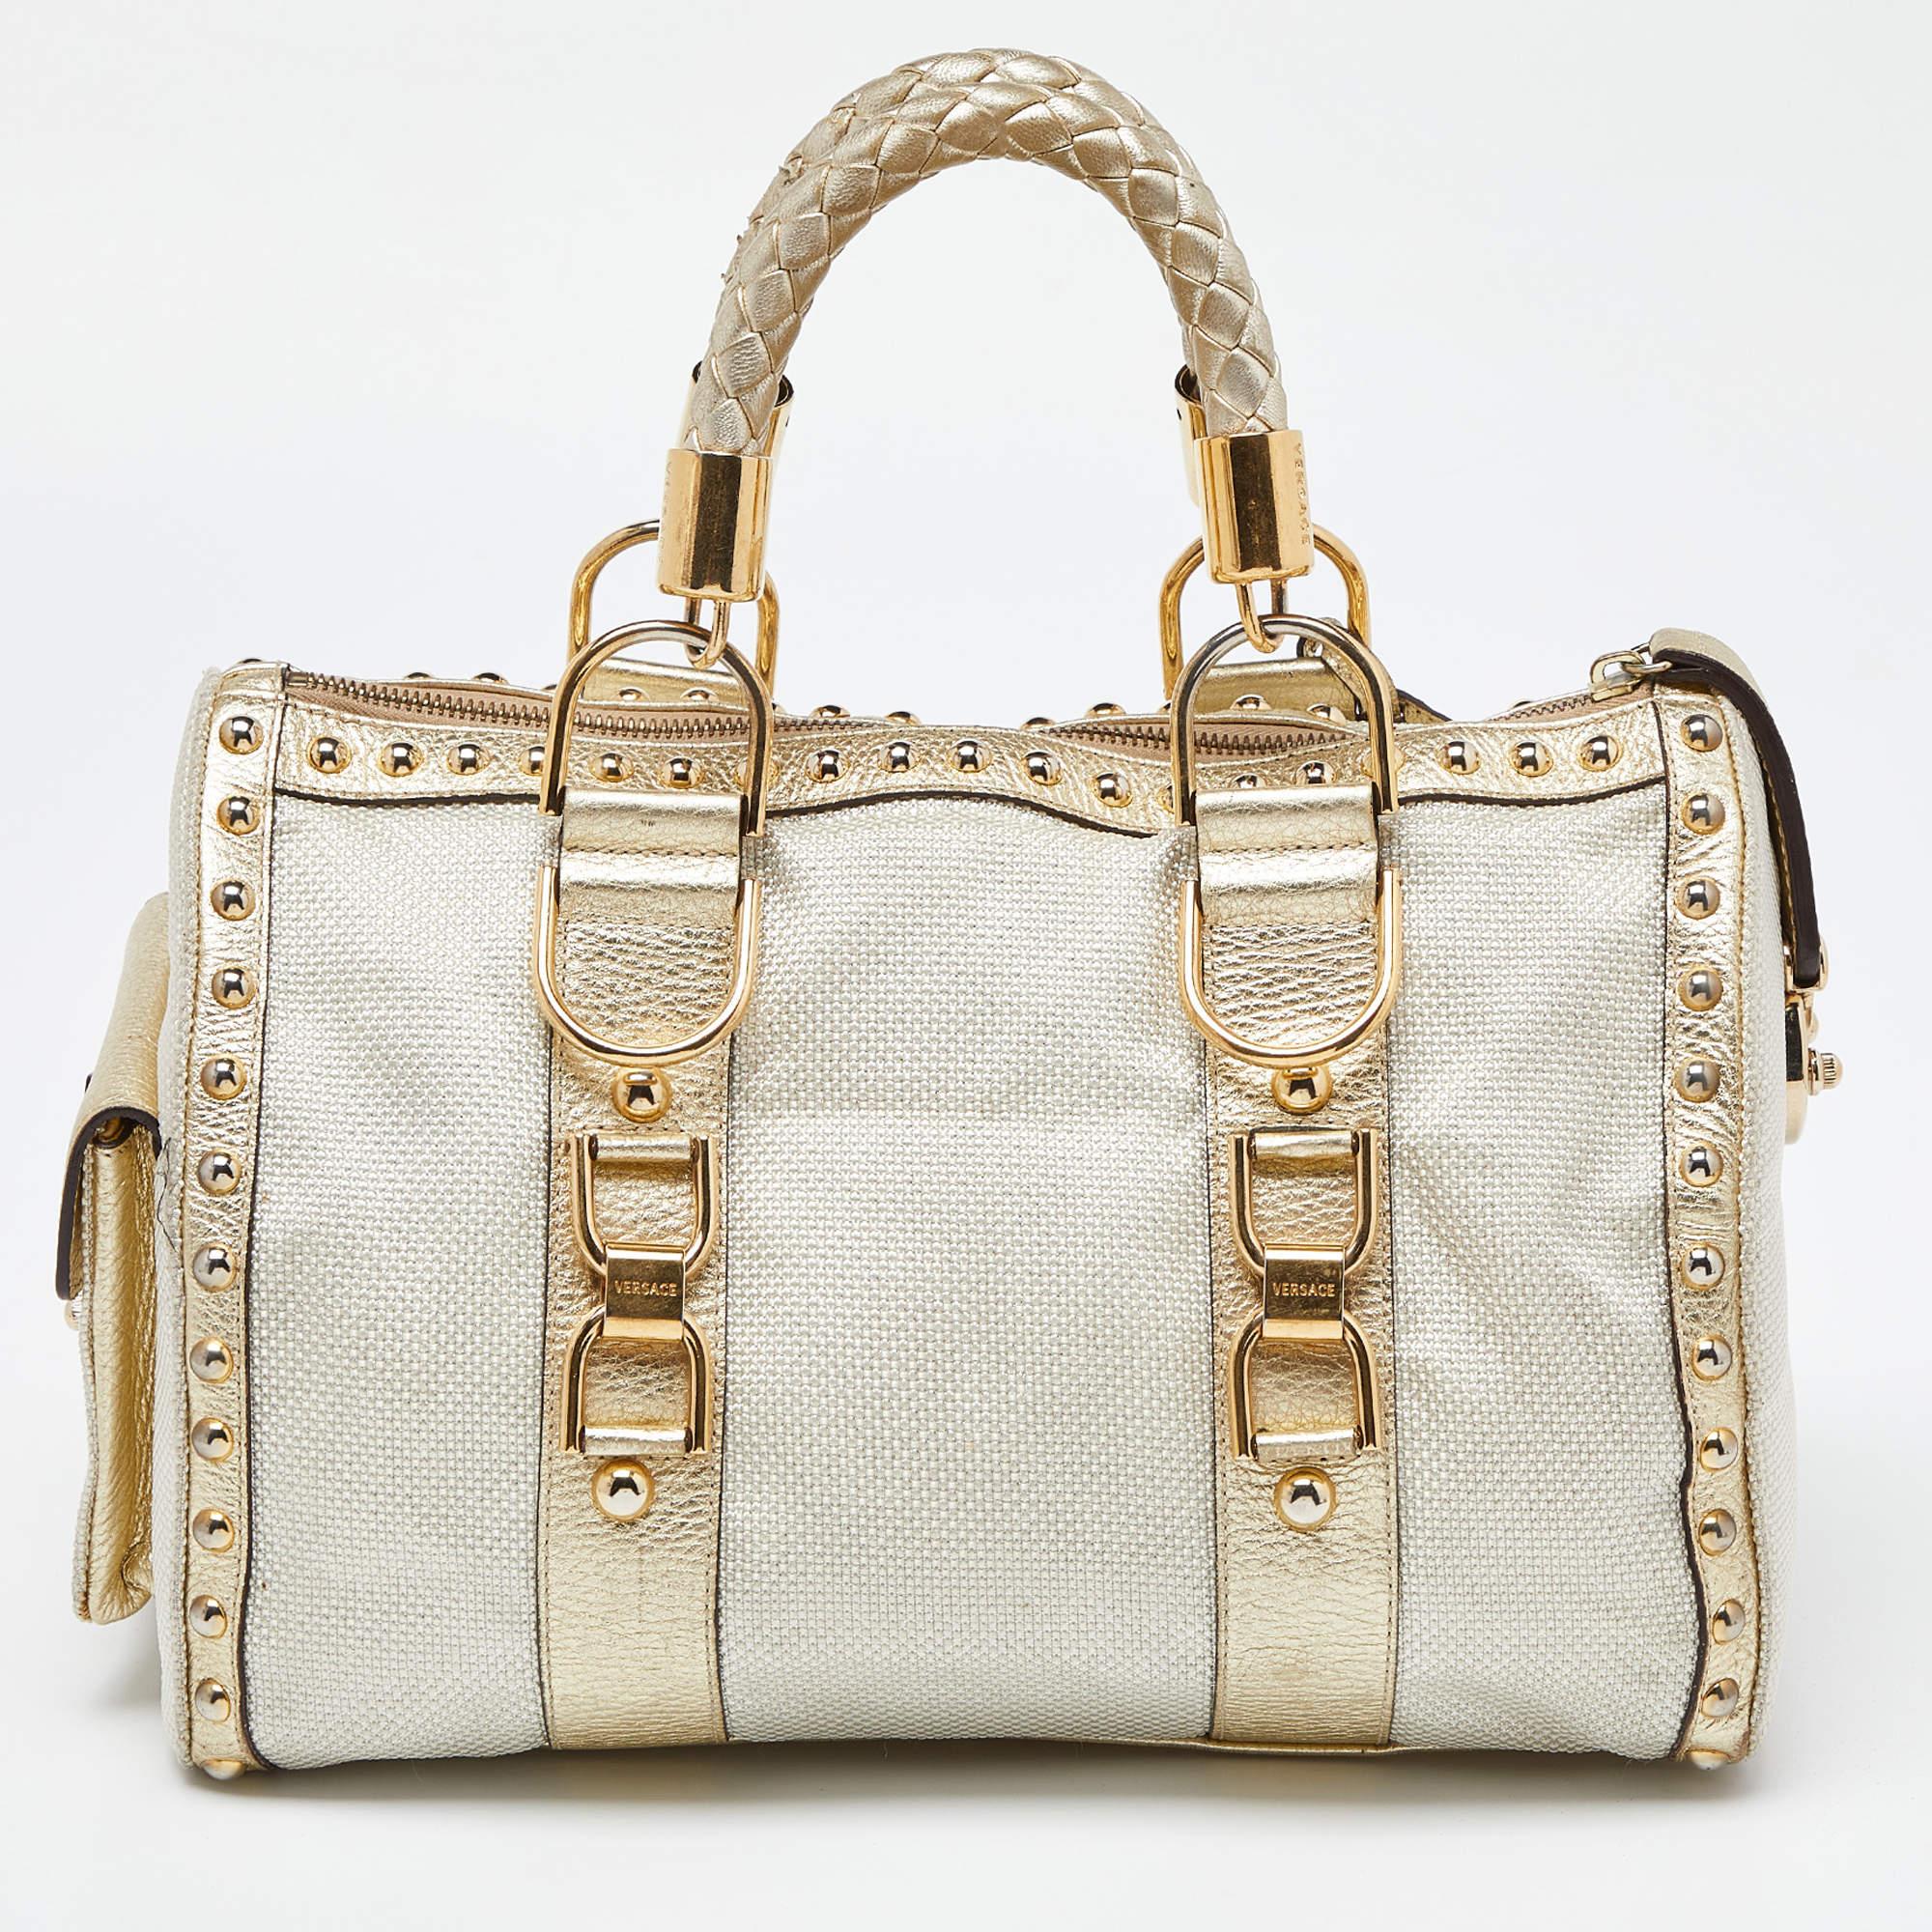 Versace Beige/Gold Nylon and Leather Studded Madonna Satchel In Good Condition For Sale In Dubai, Al Qouz 2